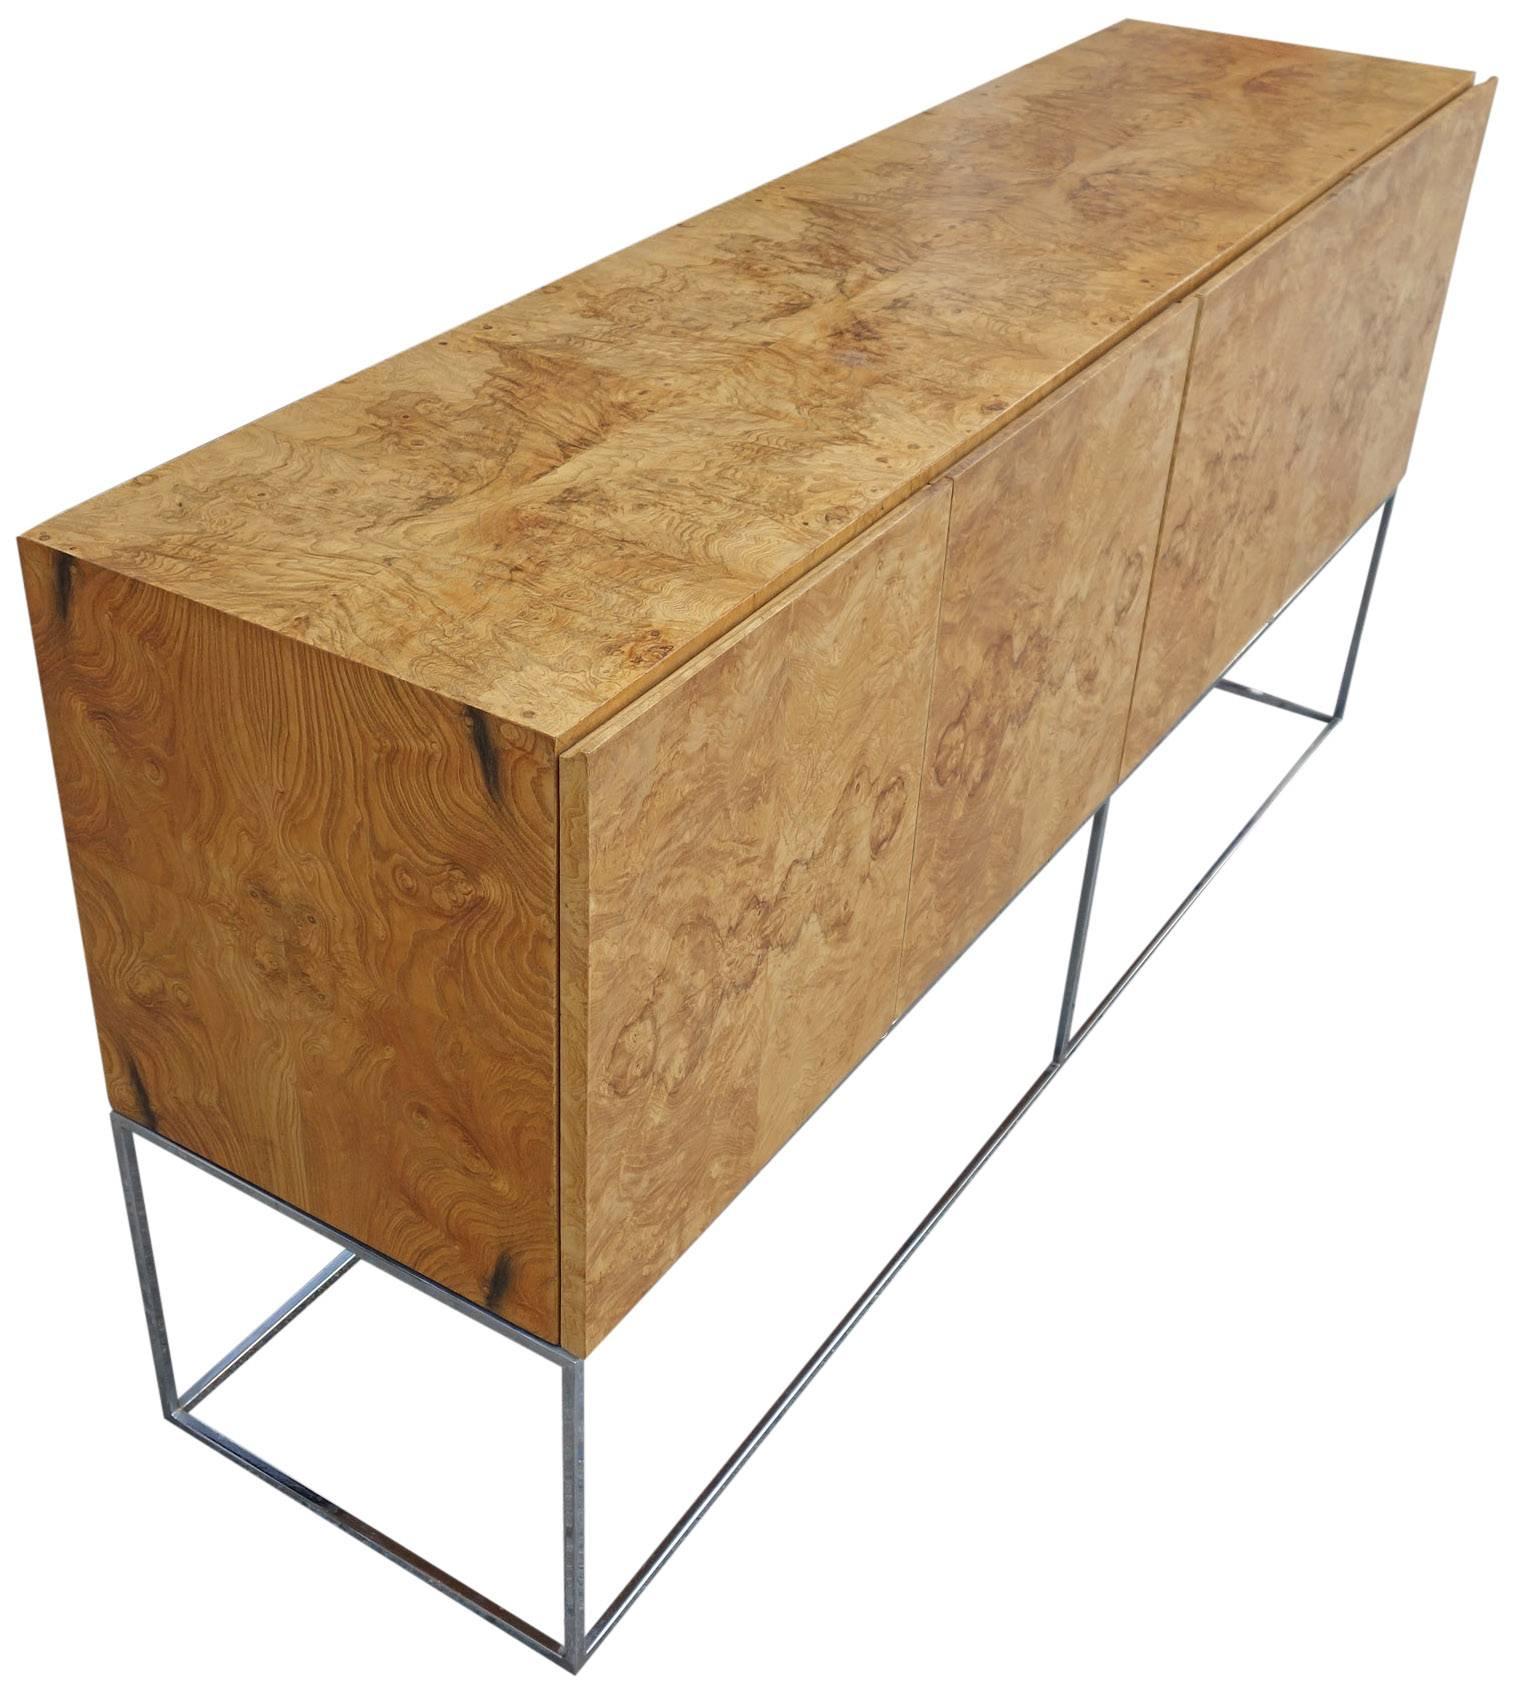 For your consideration is a beautiful Milo Baughman for Thayer Coggin sideboard or credenza in bookmatched burl wood veneer on a slim chrome base. The piece is a beautiful Mid-Century Modern 1970s statement piece from one of the masters of American